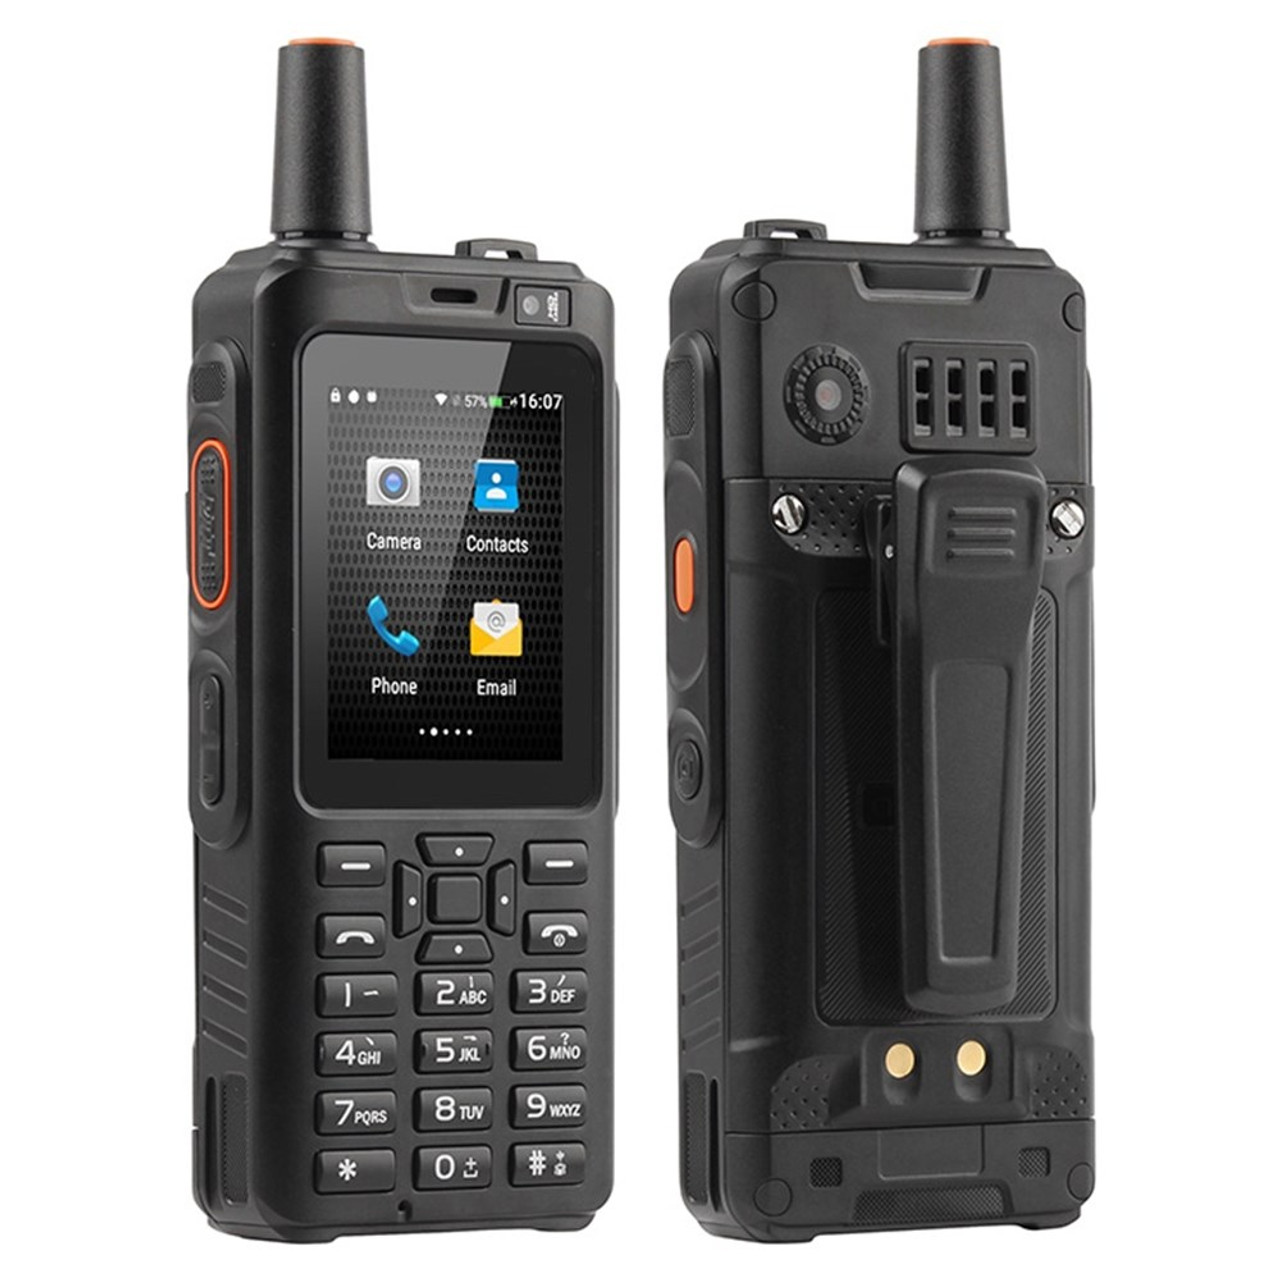 UNIWA F40 MTK6737 1+8G 2.4 inch 4G LTE POC Walkie Talkie Android Smartphone  IP65 Waterproof Classic Bar Phone for Construction Site, Security Staff,  Outdoor Climbing Snatcher